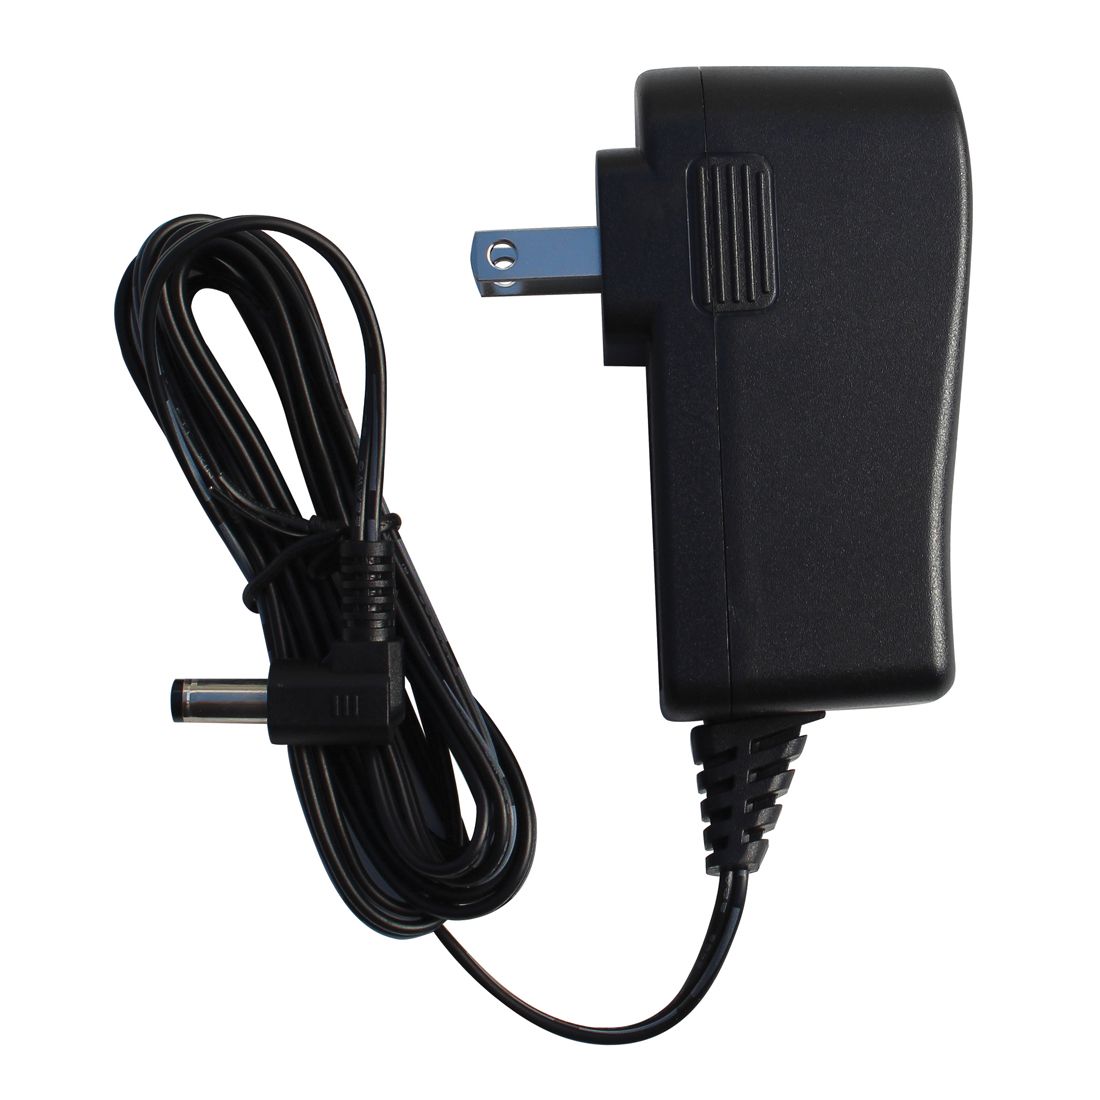 Extra AC Adapter for Cordless Phones